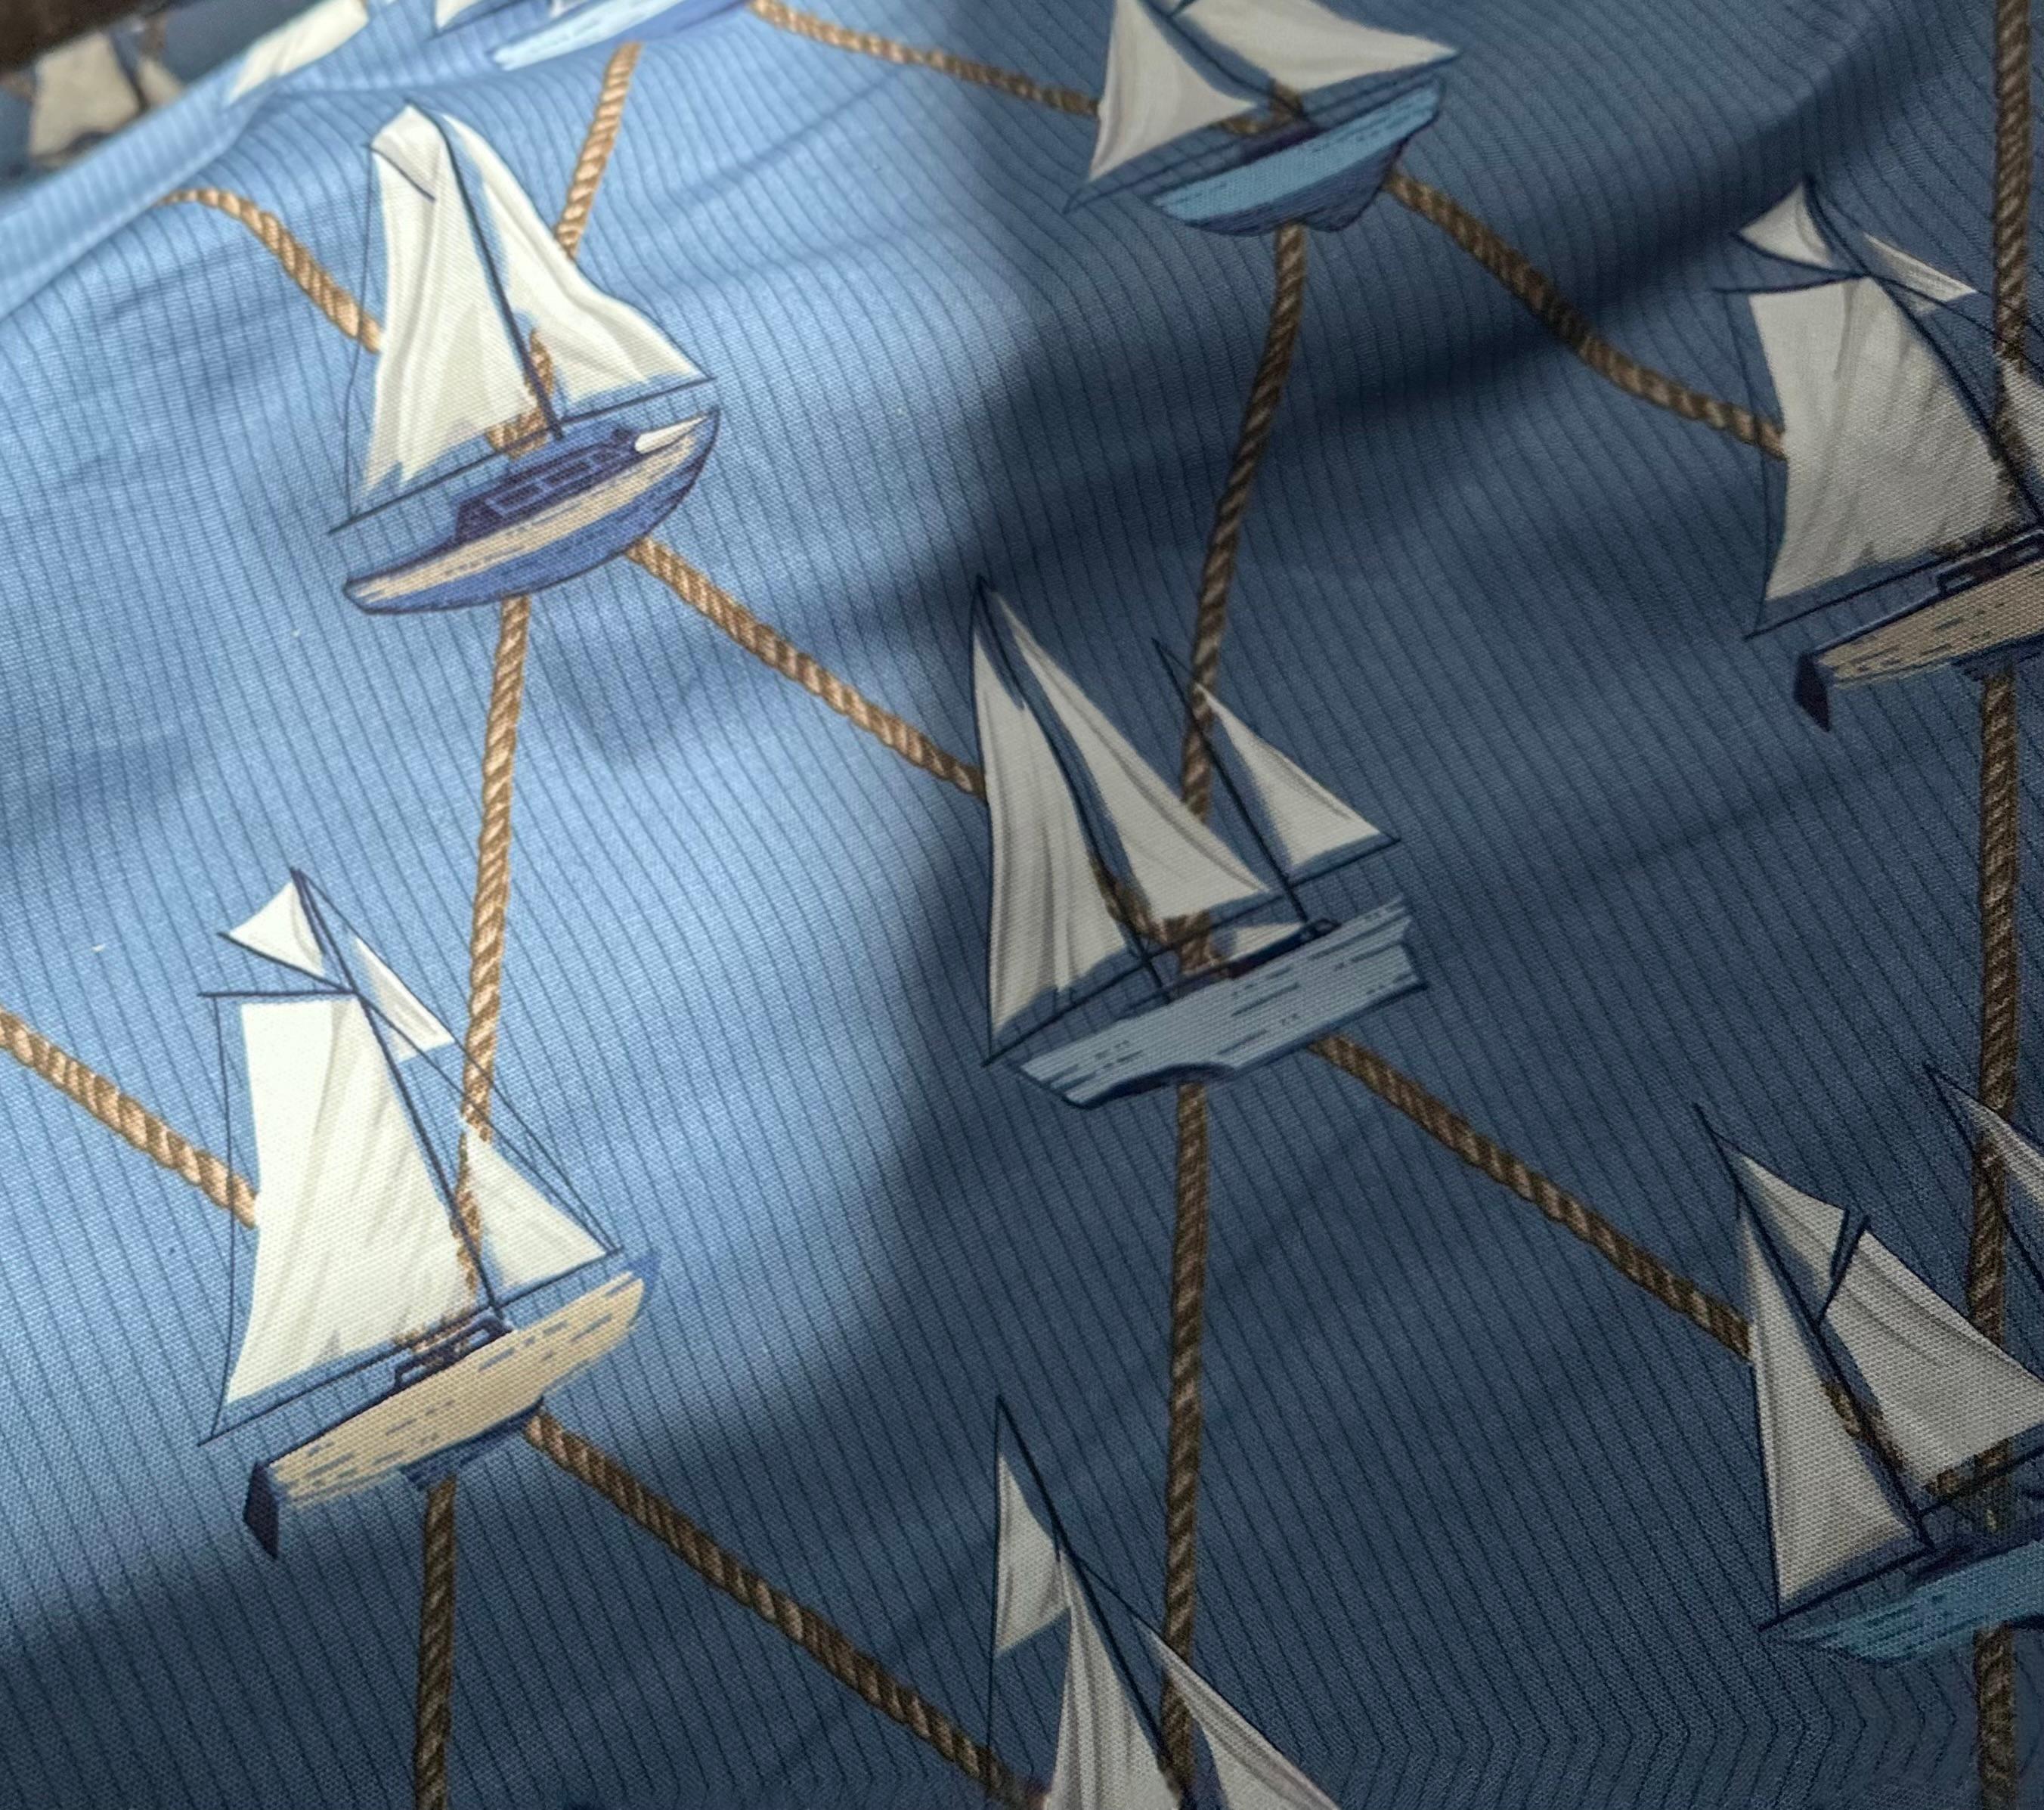 Schumacher Sailboats Nautical Textile Yardage, Cotton, Blue, Vintage. 1990’s. Appears to be a bolt. Many yards. Width of fabric is approximately 54.”.